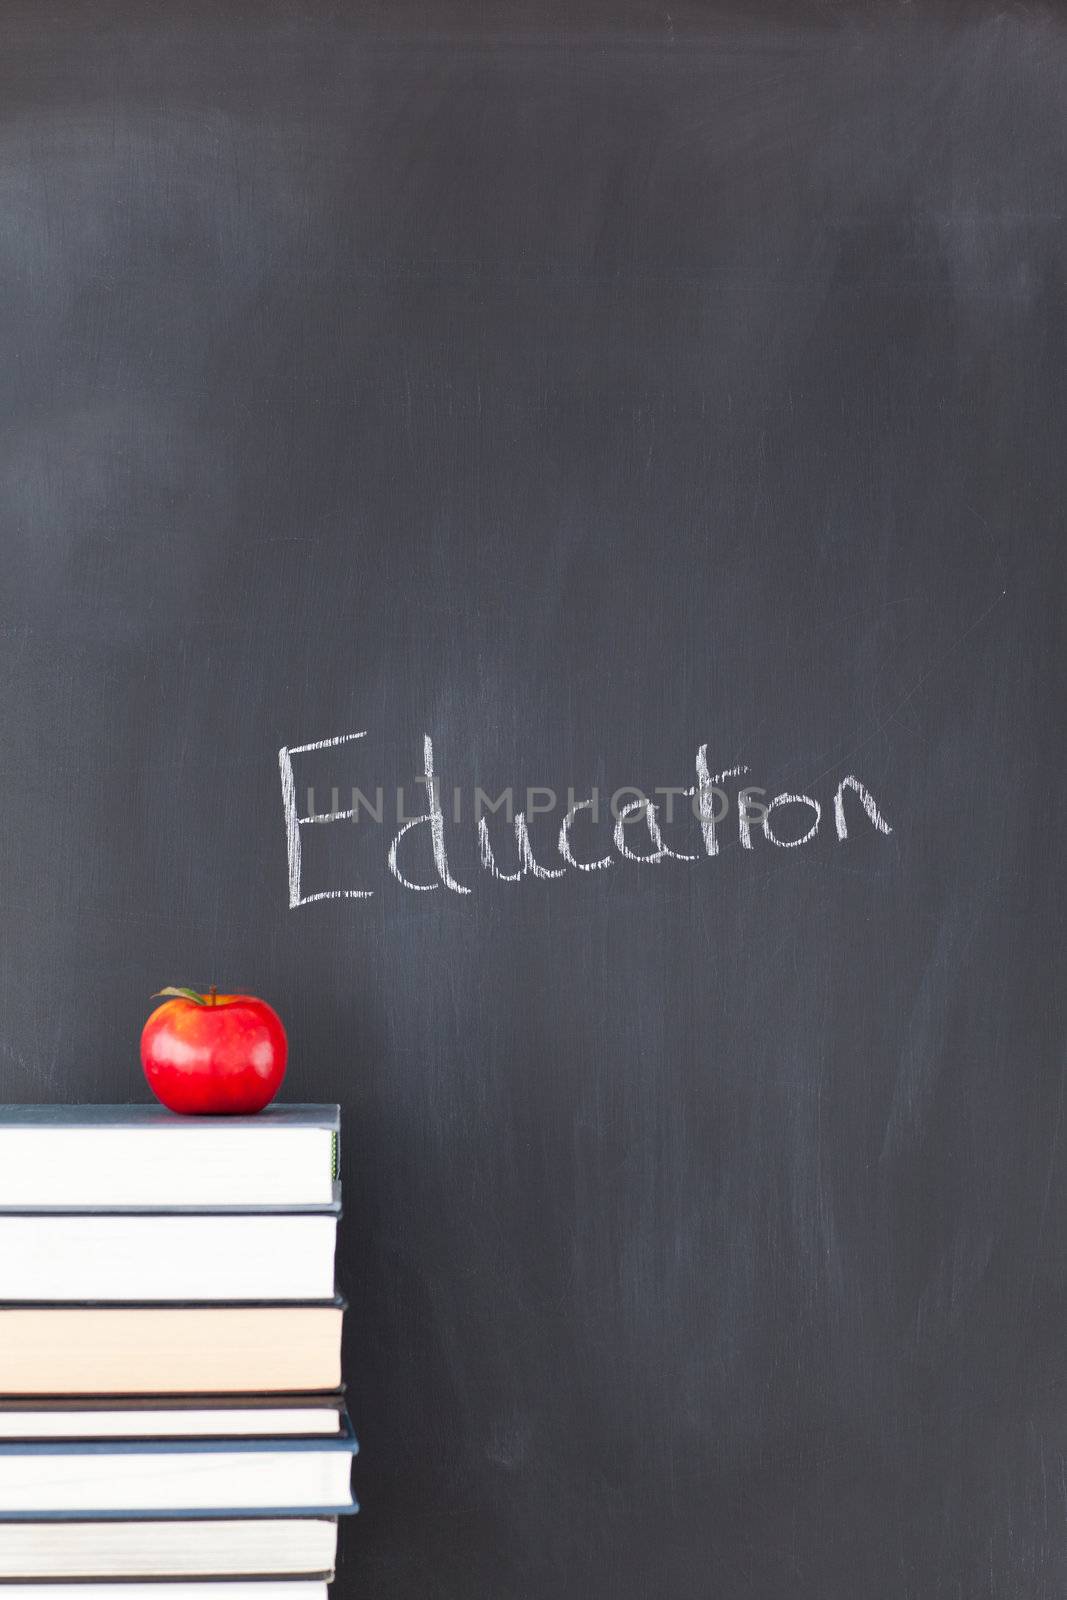 Stack of books with a red apple and a blackboard with "education" written on it